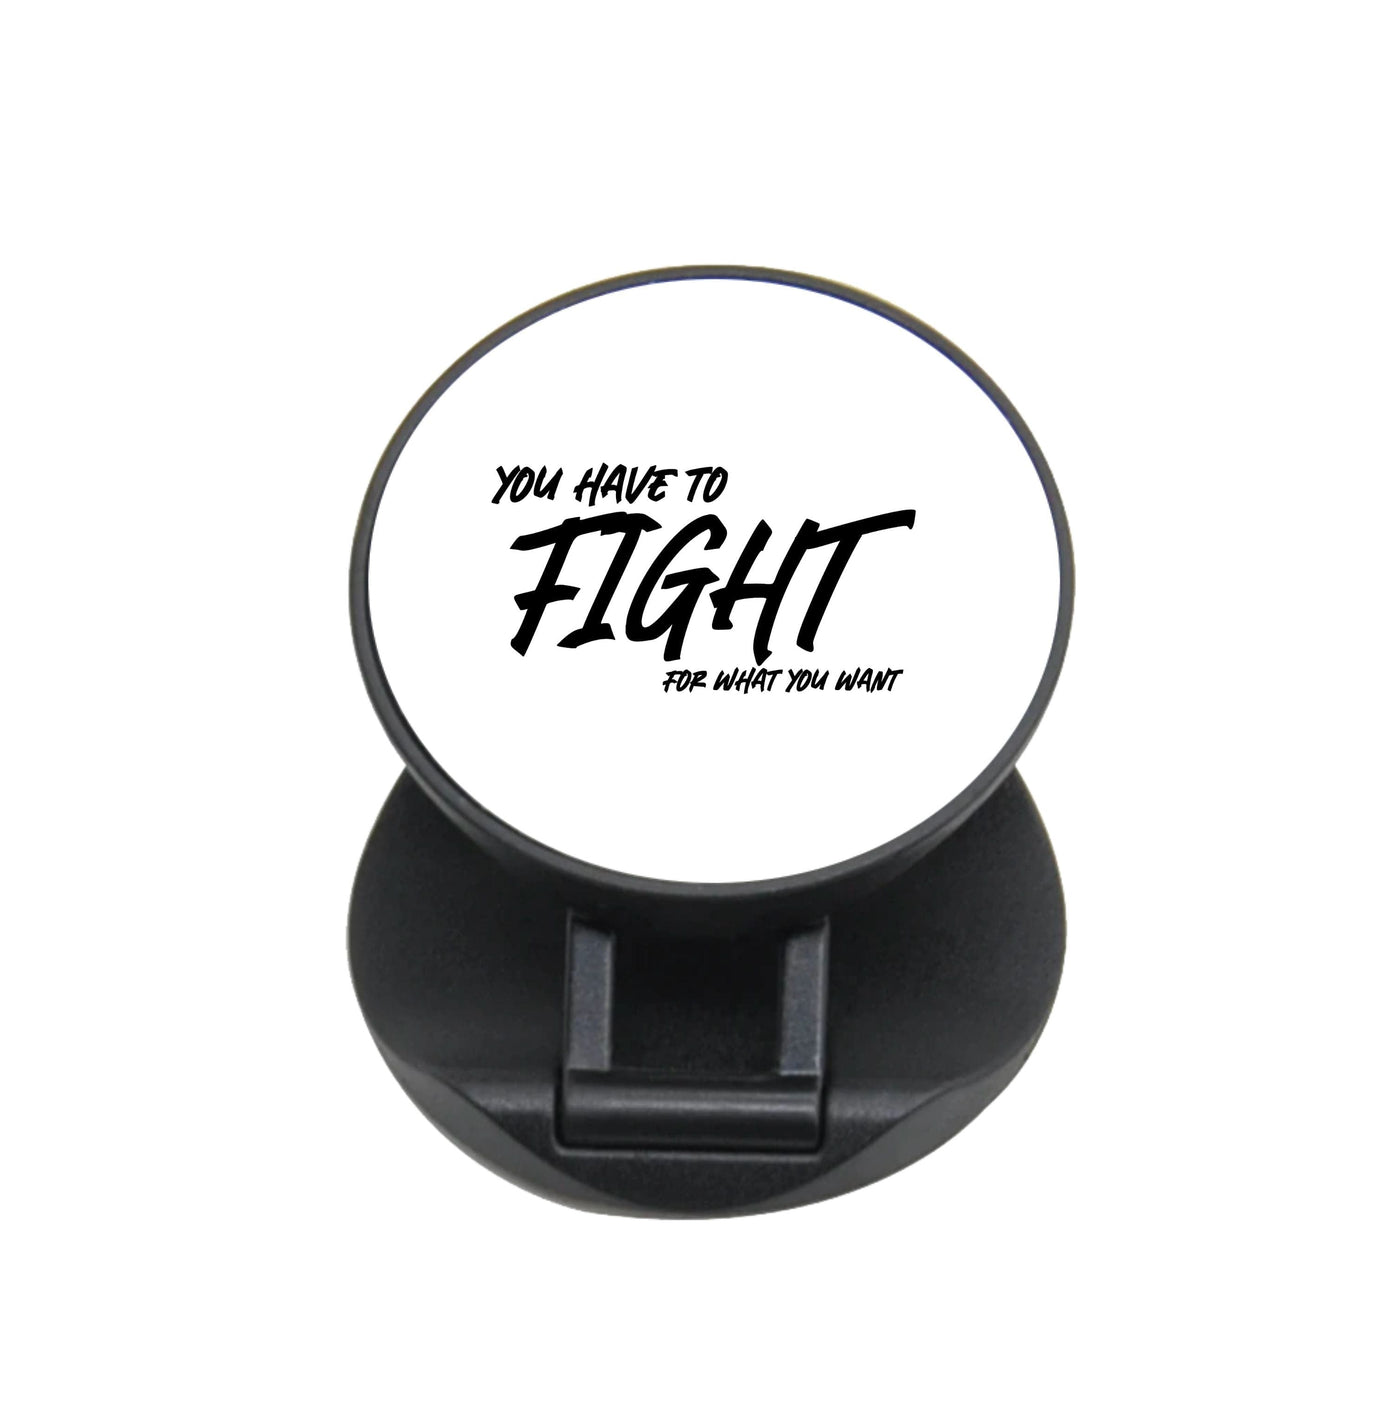 You Have To Fight - Top Boy FunGrip